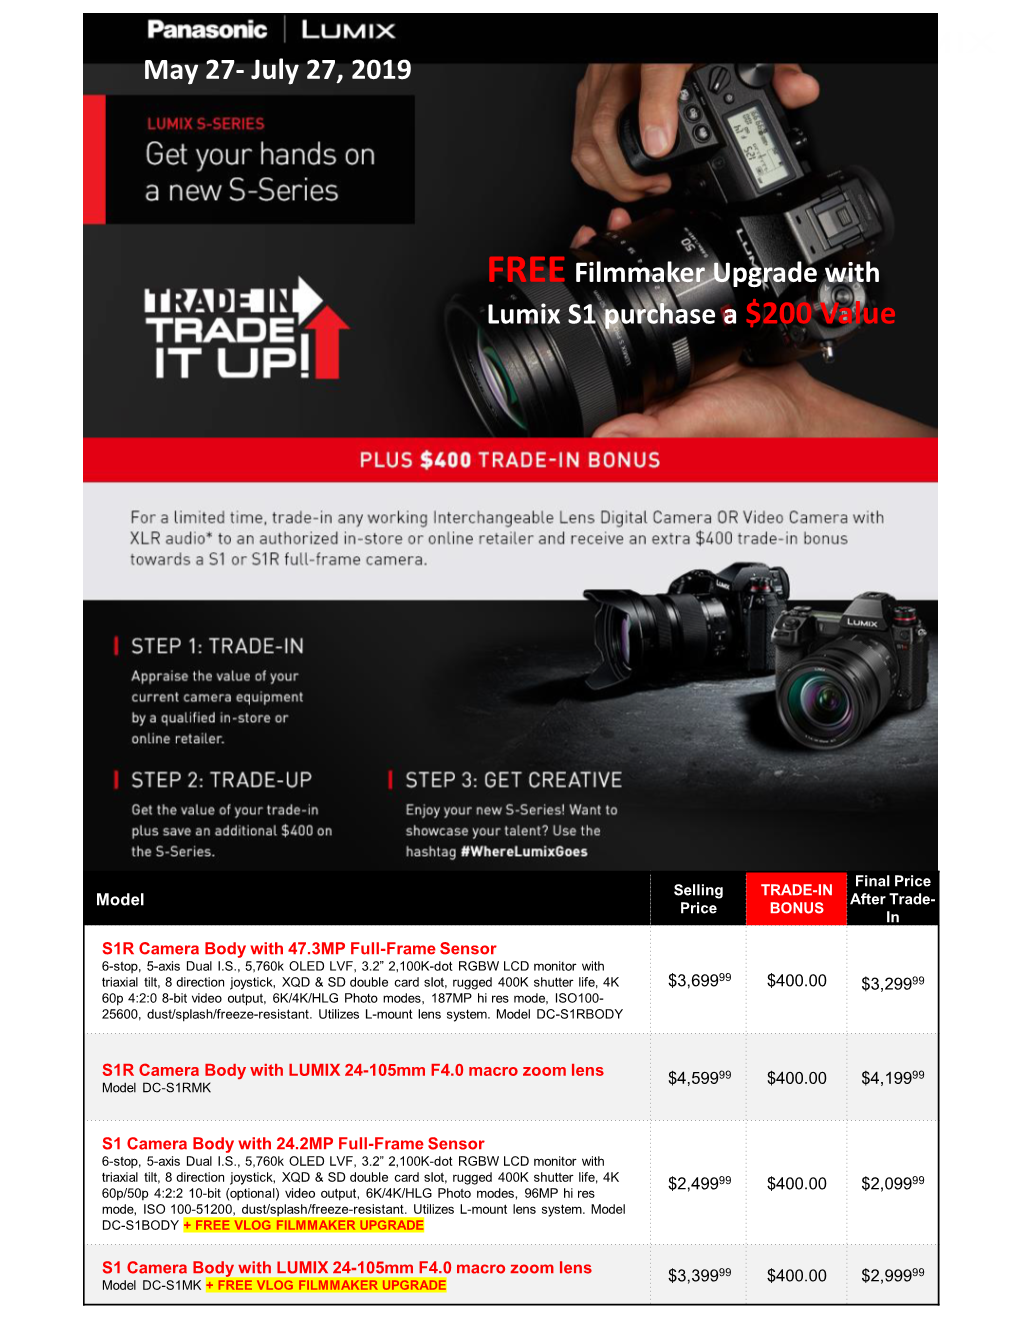 July 27, 2019 FREE Filmmaker Upgrade with Lumix S1 Purchase A